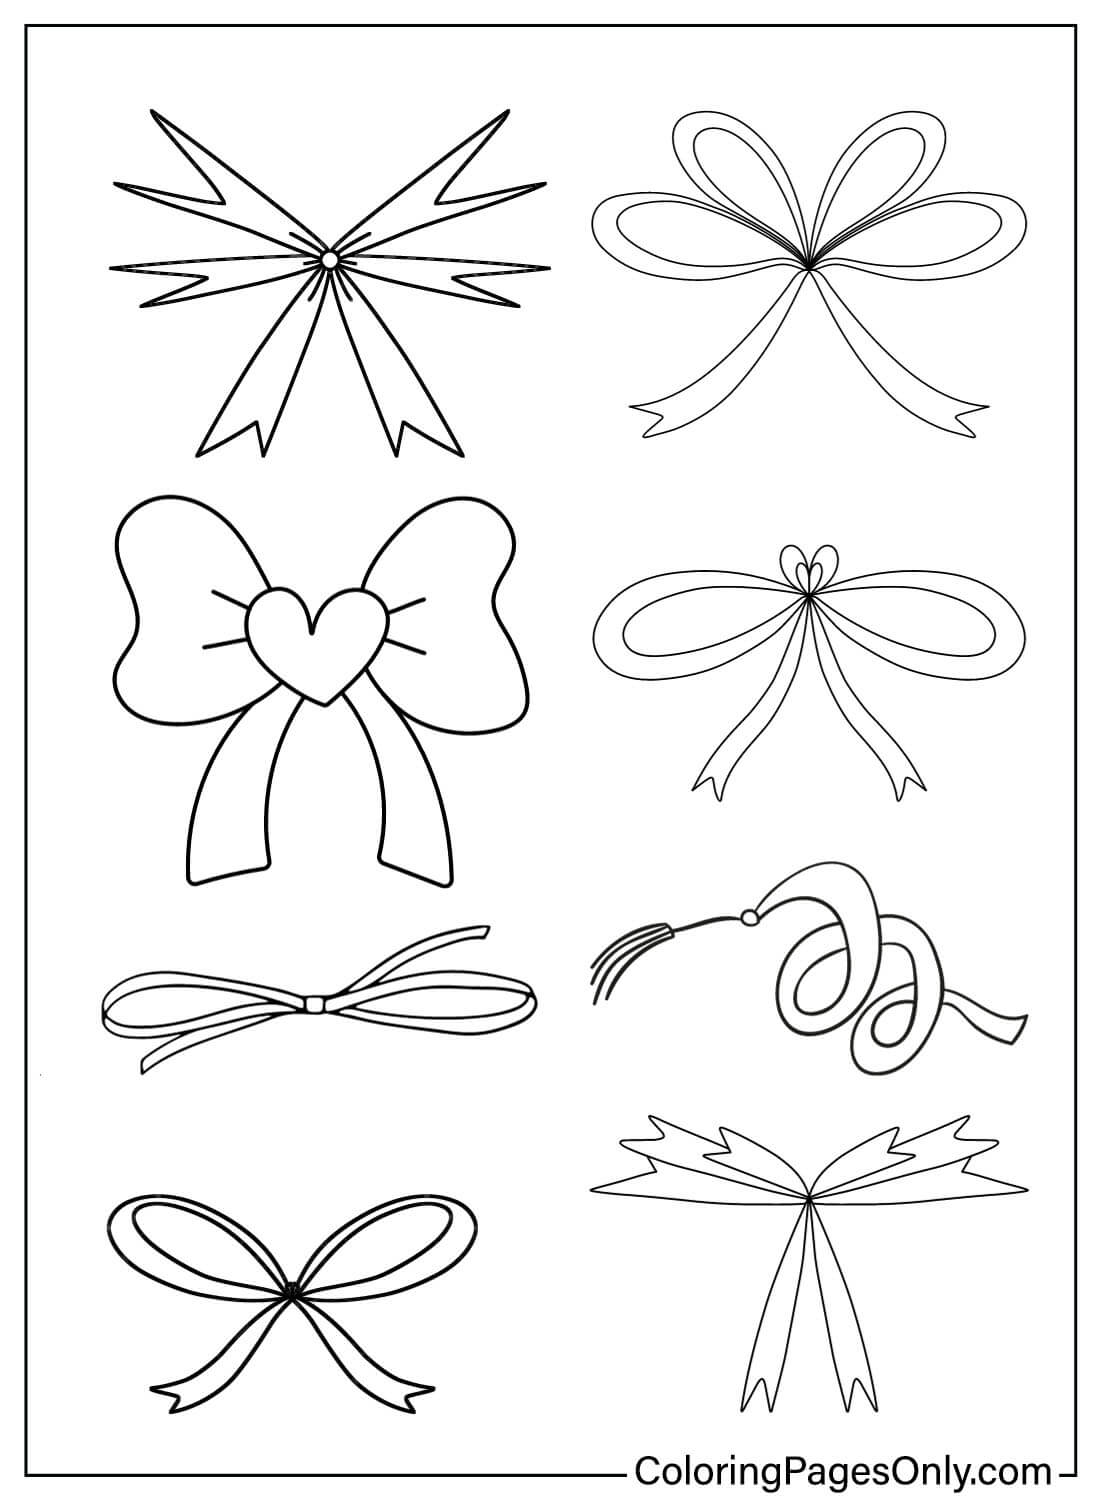 Printable Coloring Page Bow from Bow